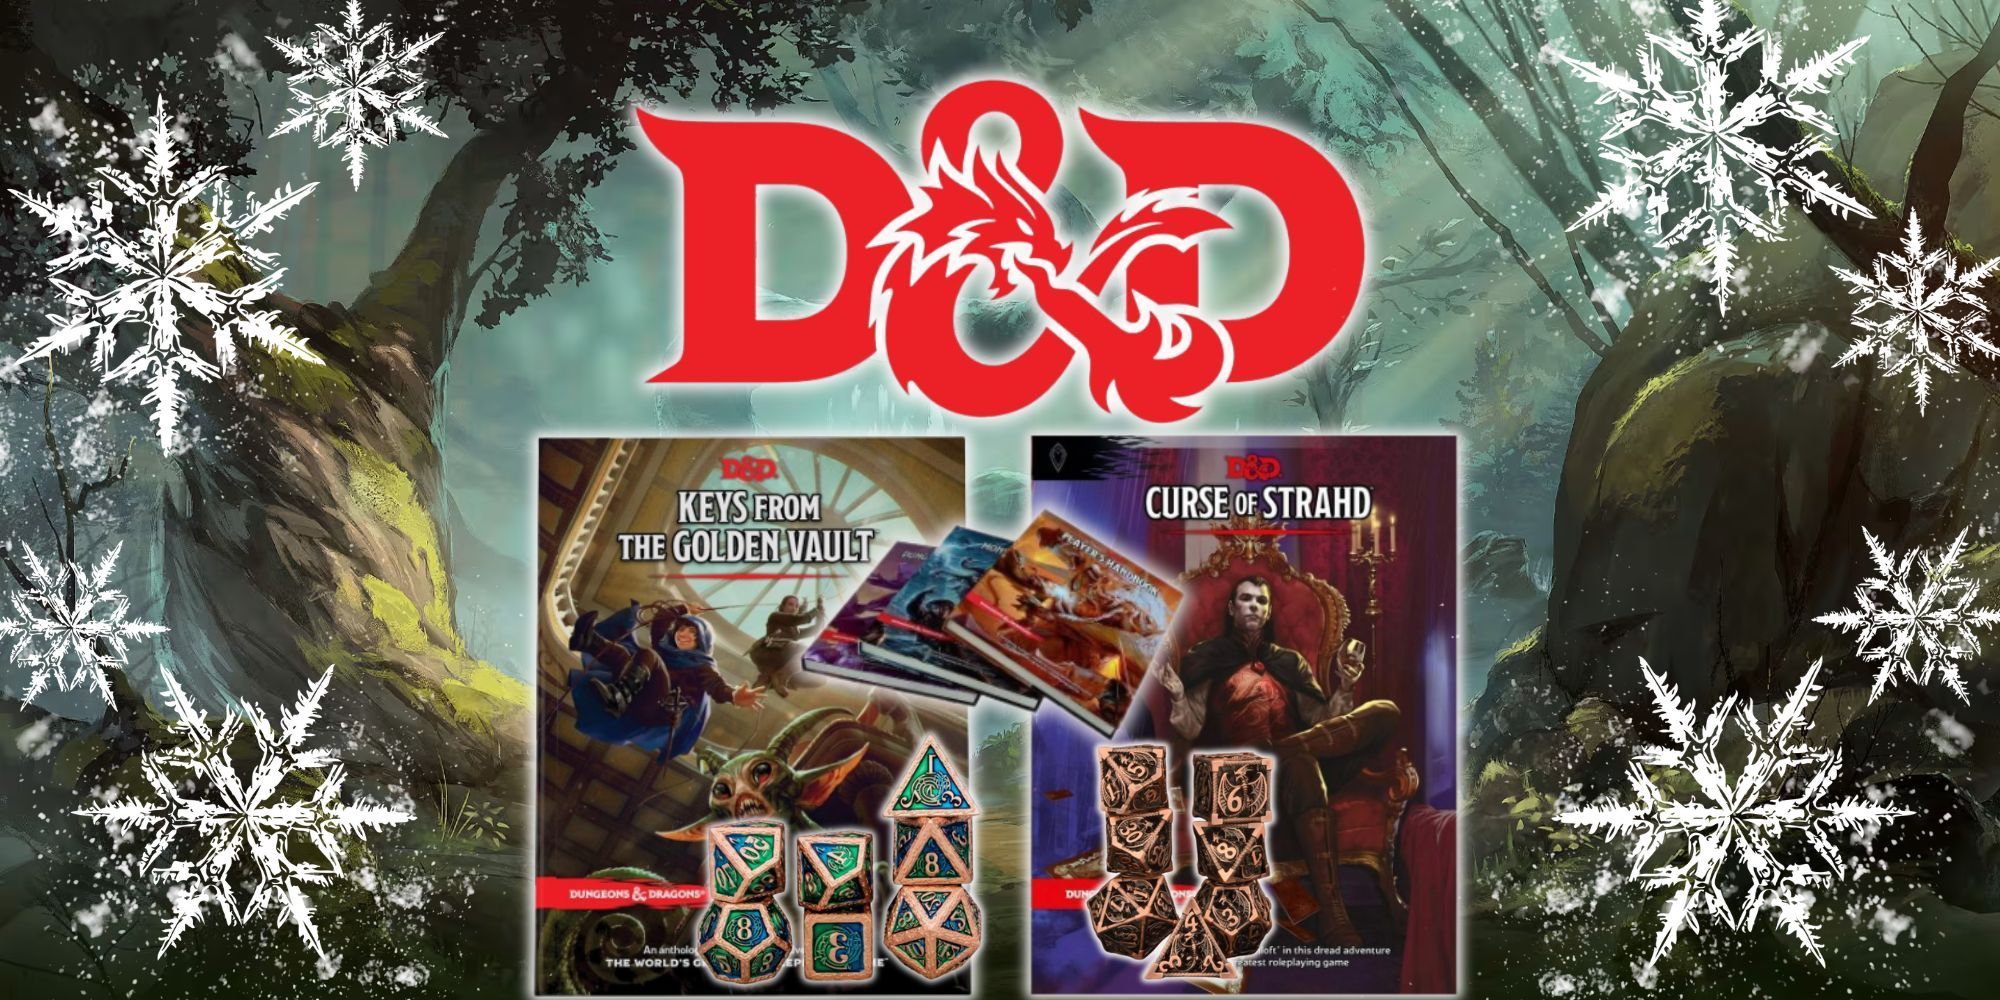 D&D Christmas Product Banner showing D&D books & dice with snowflakes